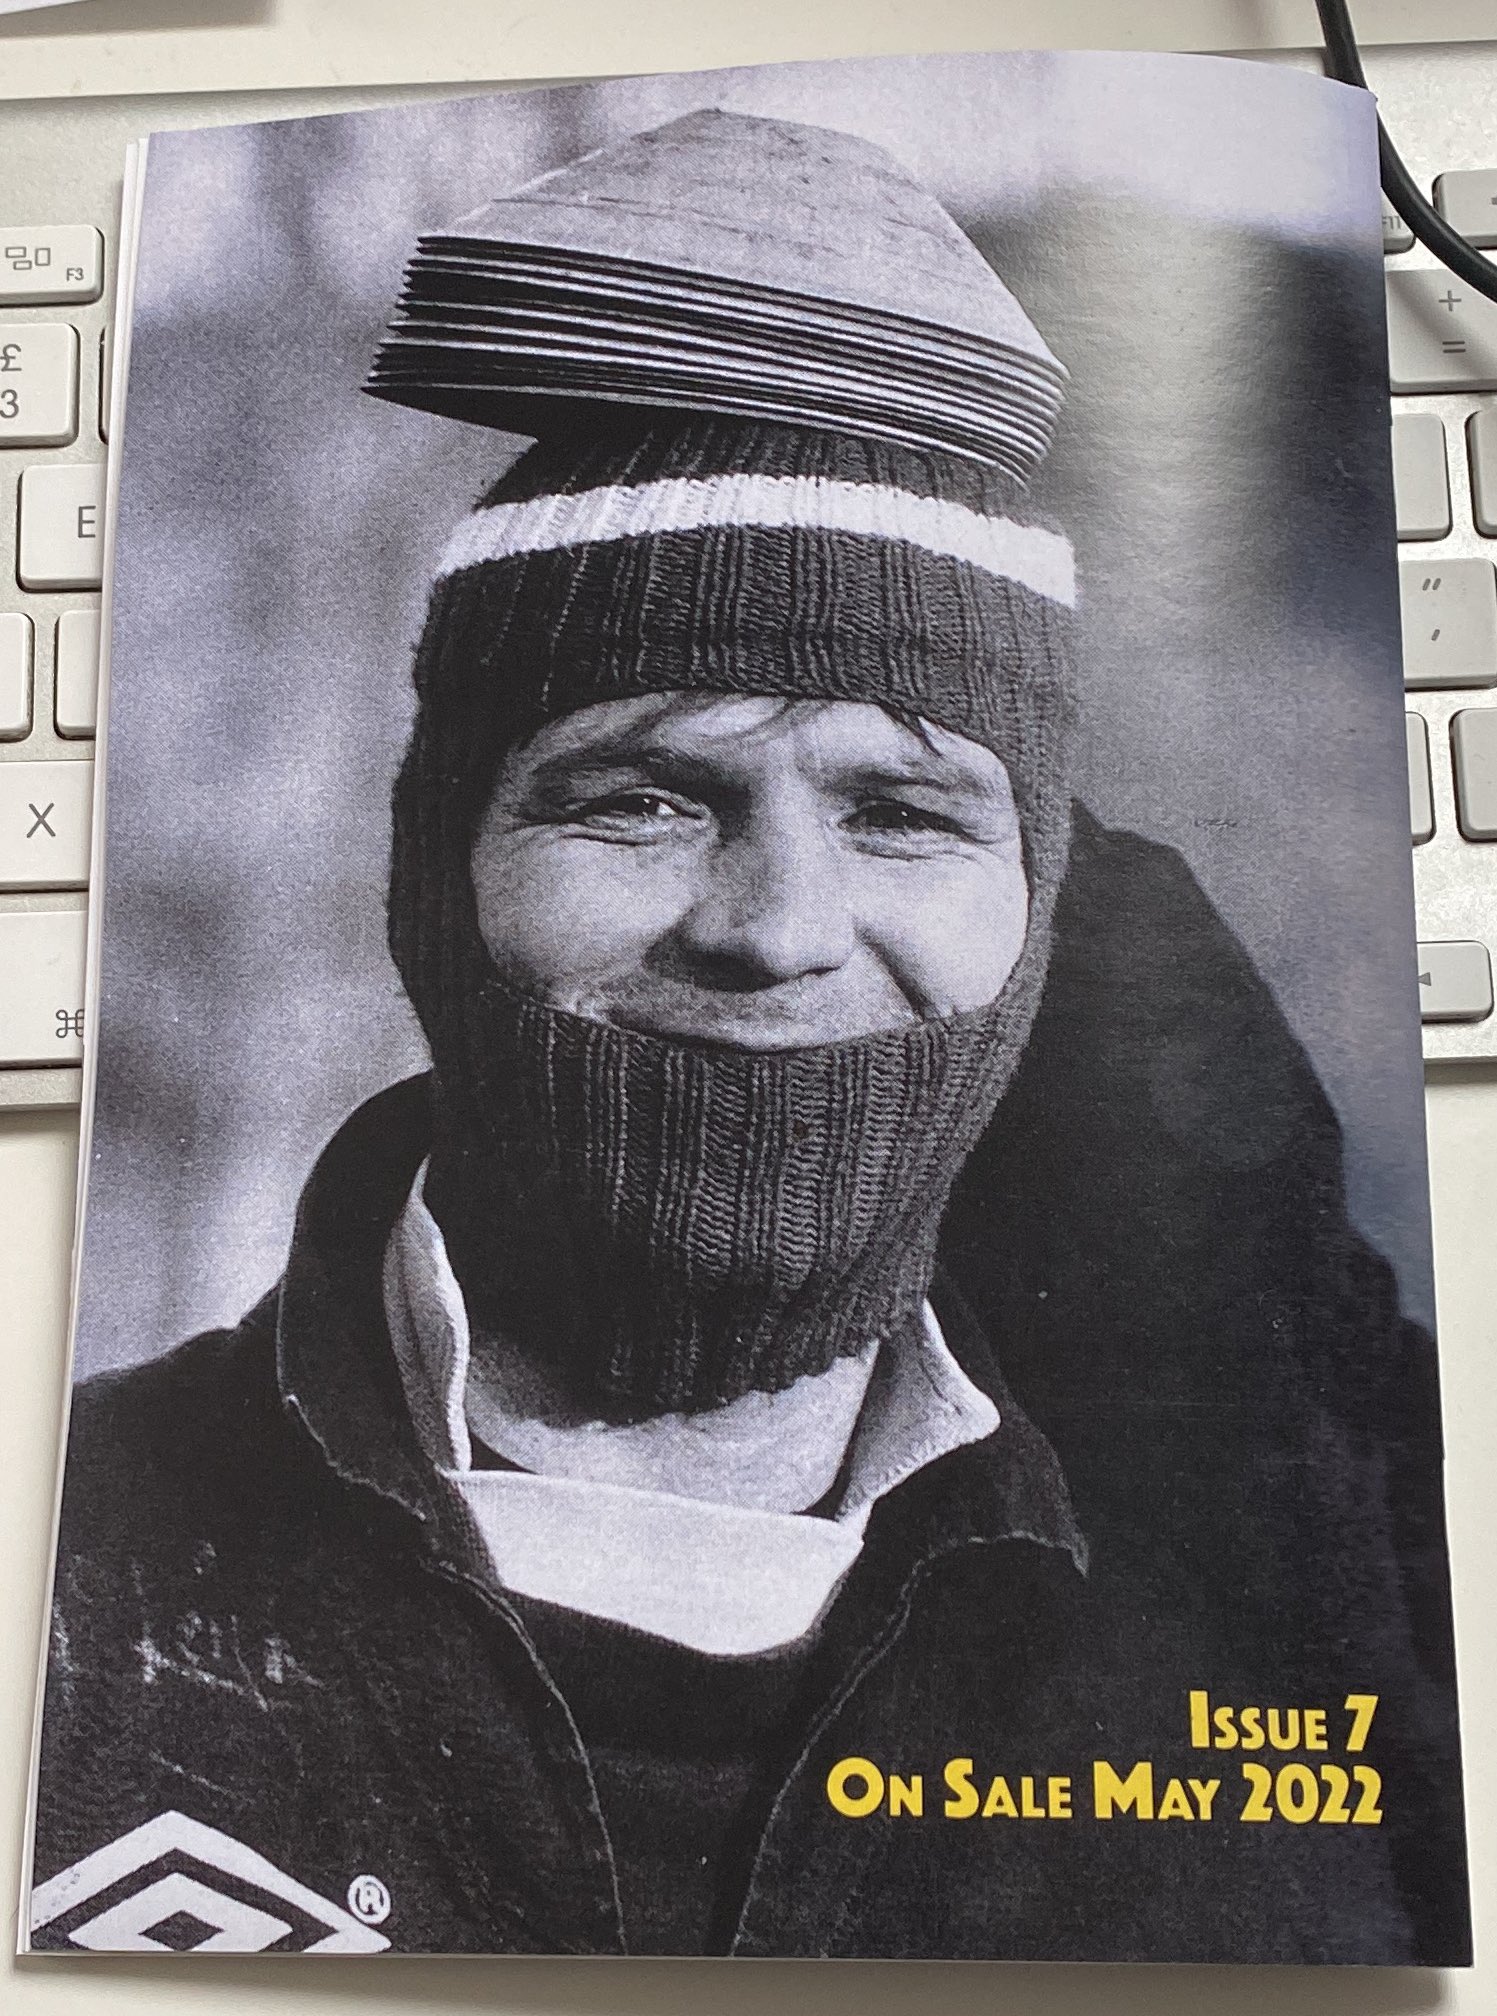 Happy birthday to Alex McLeish, pictured here on the back cover of the latest Black & Gold 